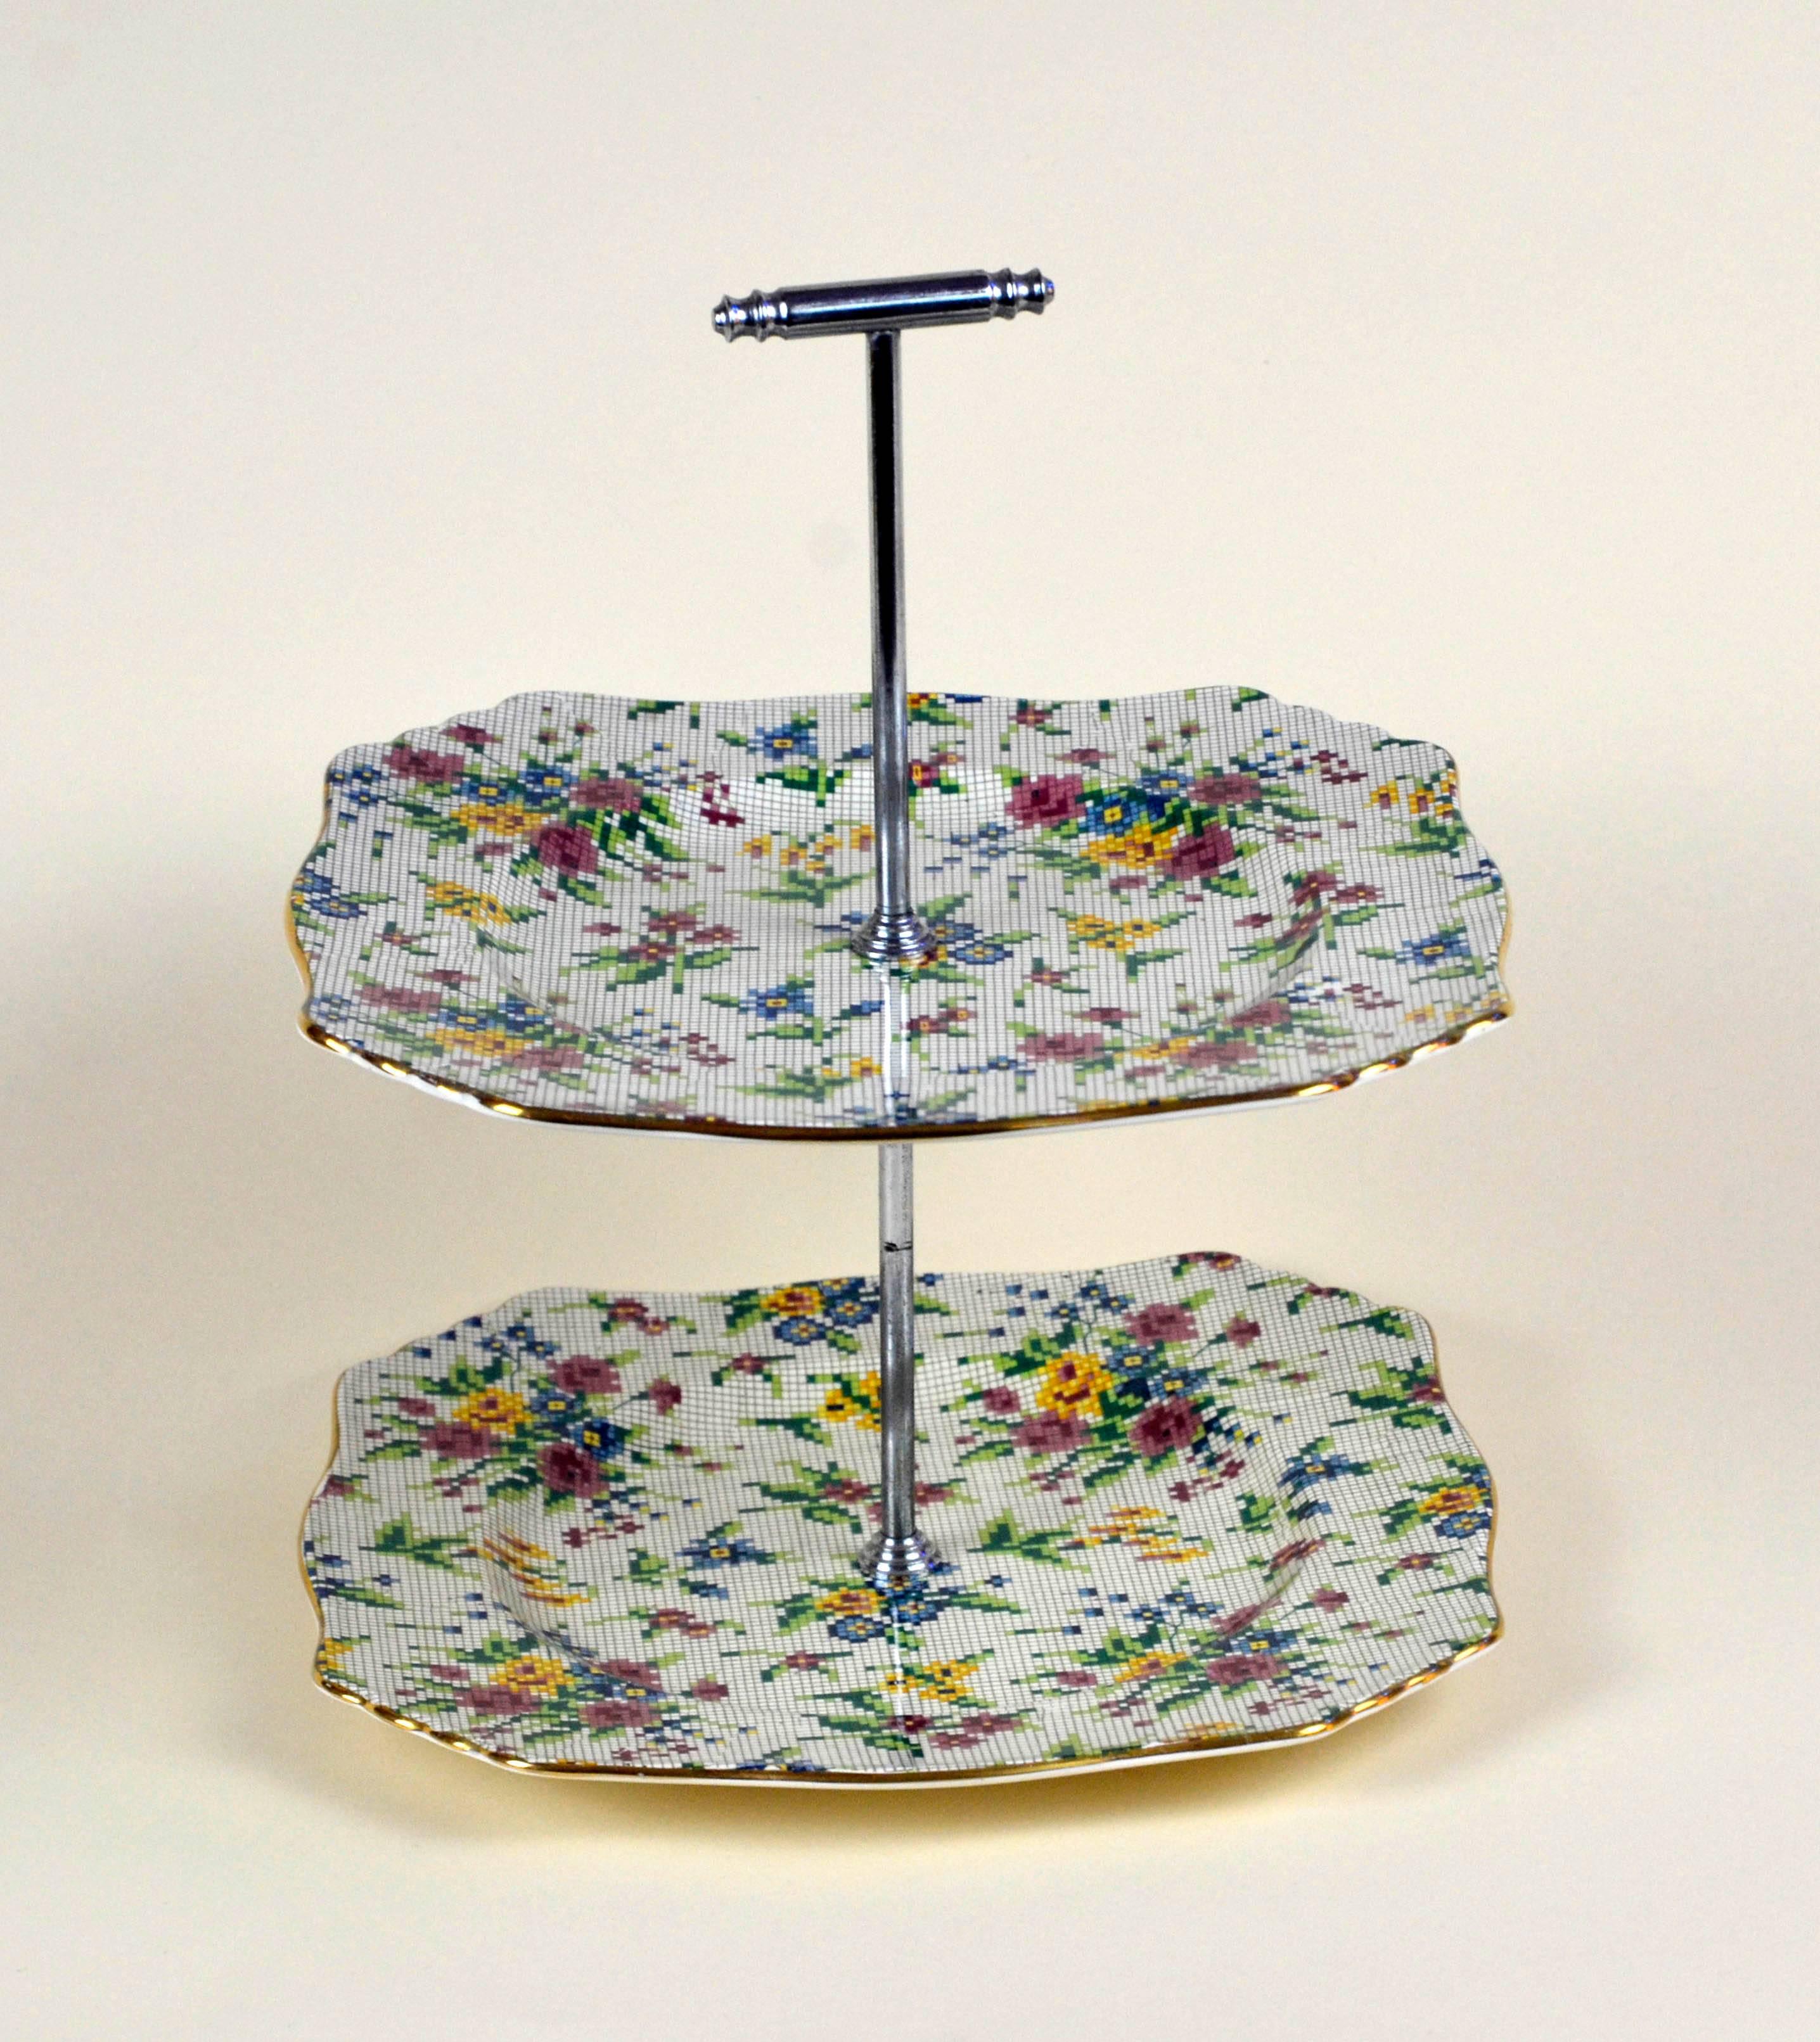 Royal Winton earthenware two-tier tidbit tray, cupcake Stand in pristine condition, not restored and ready to be used. The Queen Anne (1936) needlepoint pattern is part of the famed Chintz collection by Royal Winton. It consist of bouquets of